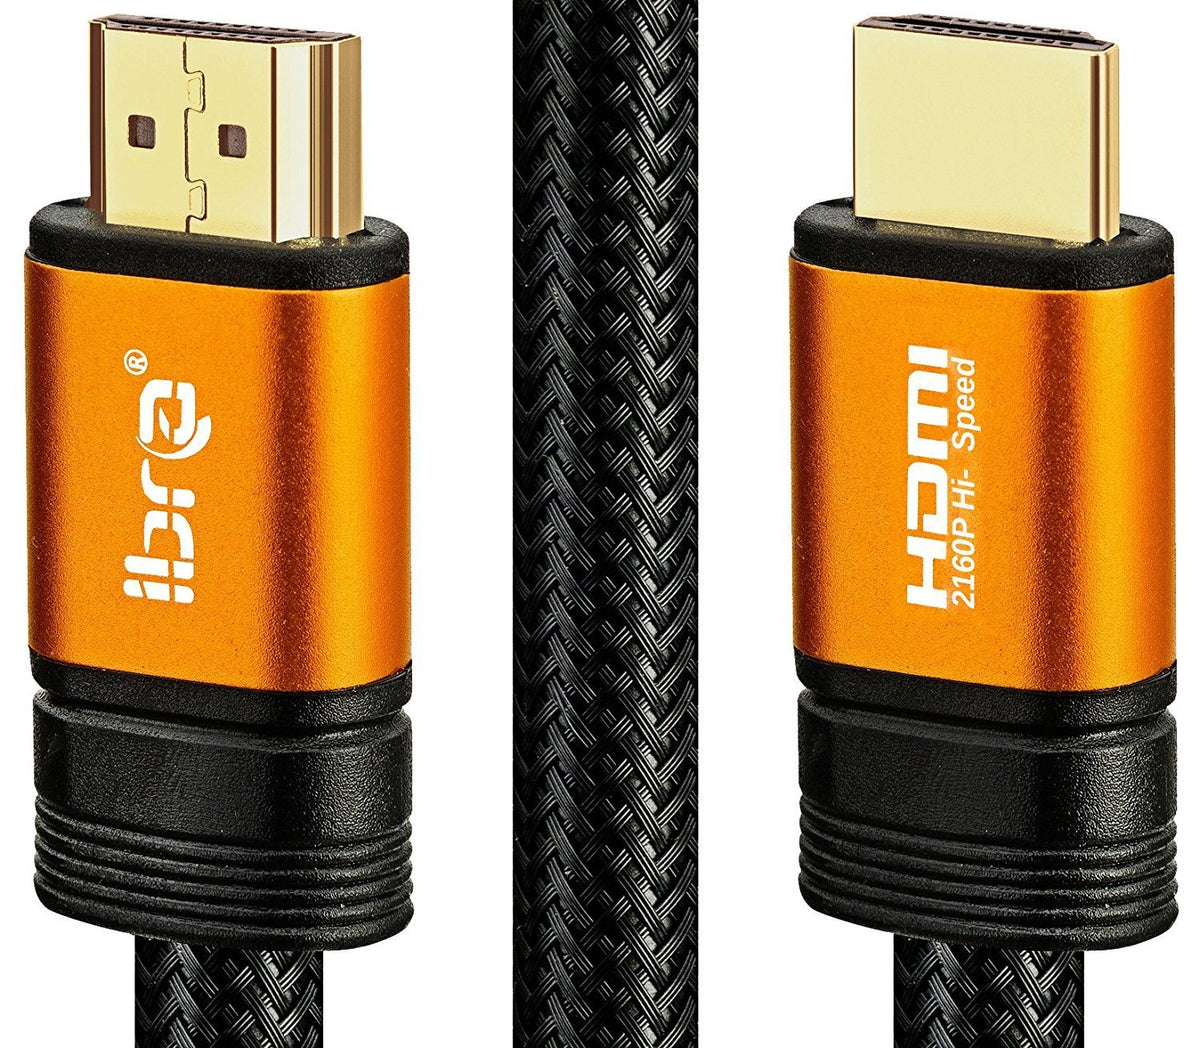 IBRA Orange HDMI Cable 10M - UHD HDMI 2.0 (4K@60Hz) Ready -18Gbps-28AWG Braided Cord -Gold Plated Connectors -Ethernet,Audio Return-Video 4K 2160p,HD 1080p,3D -Xbox PlayStation PS3 PS4 PC Apple TV